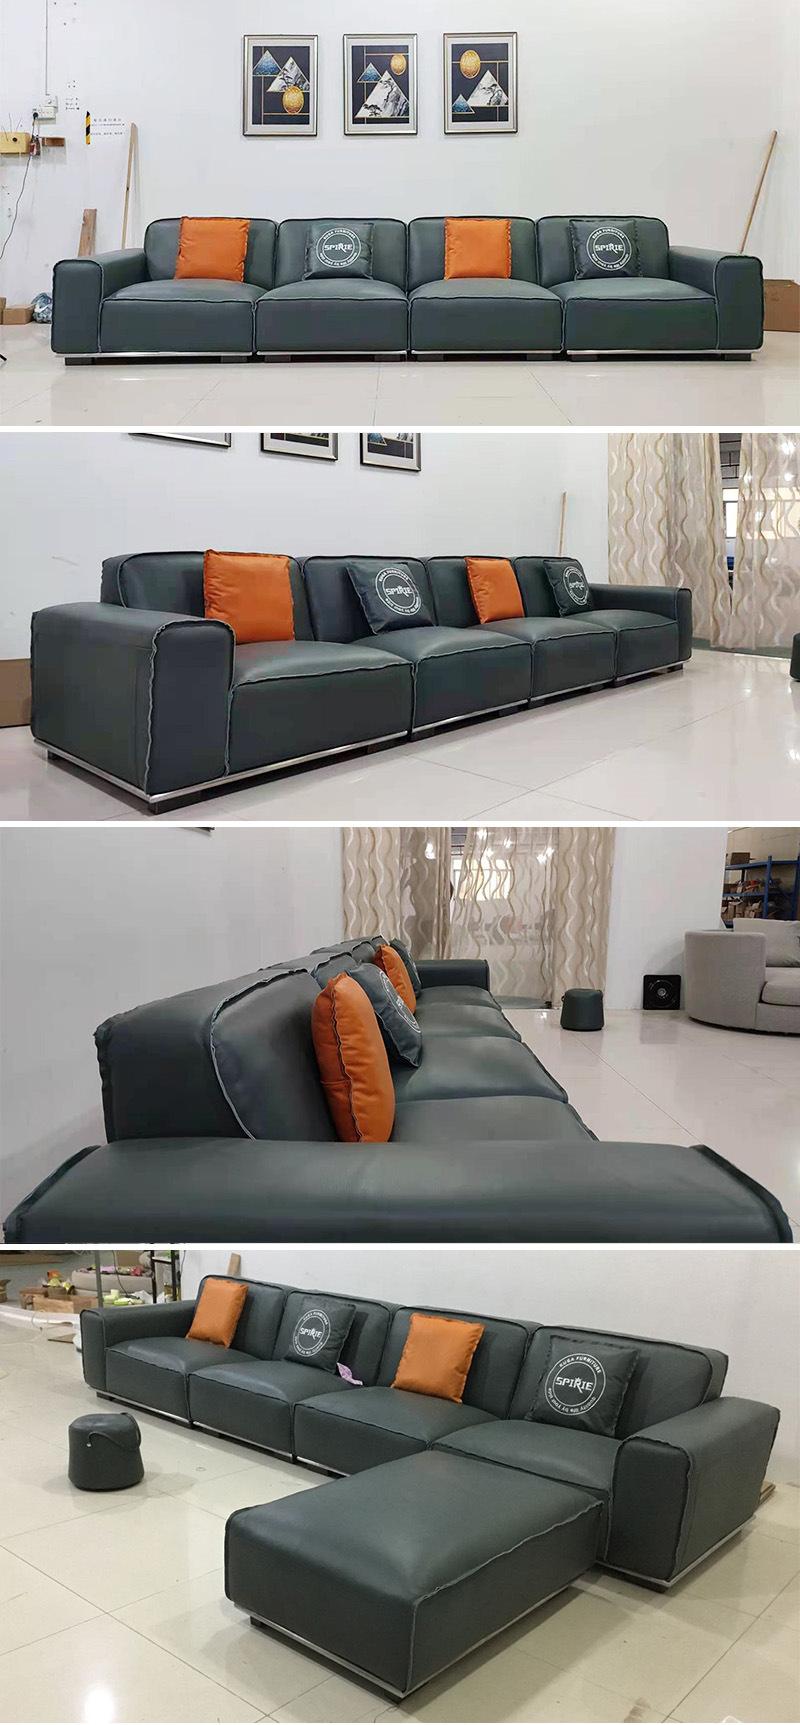 Modern Home Fabric Leather Couch for Living Room 2827